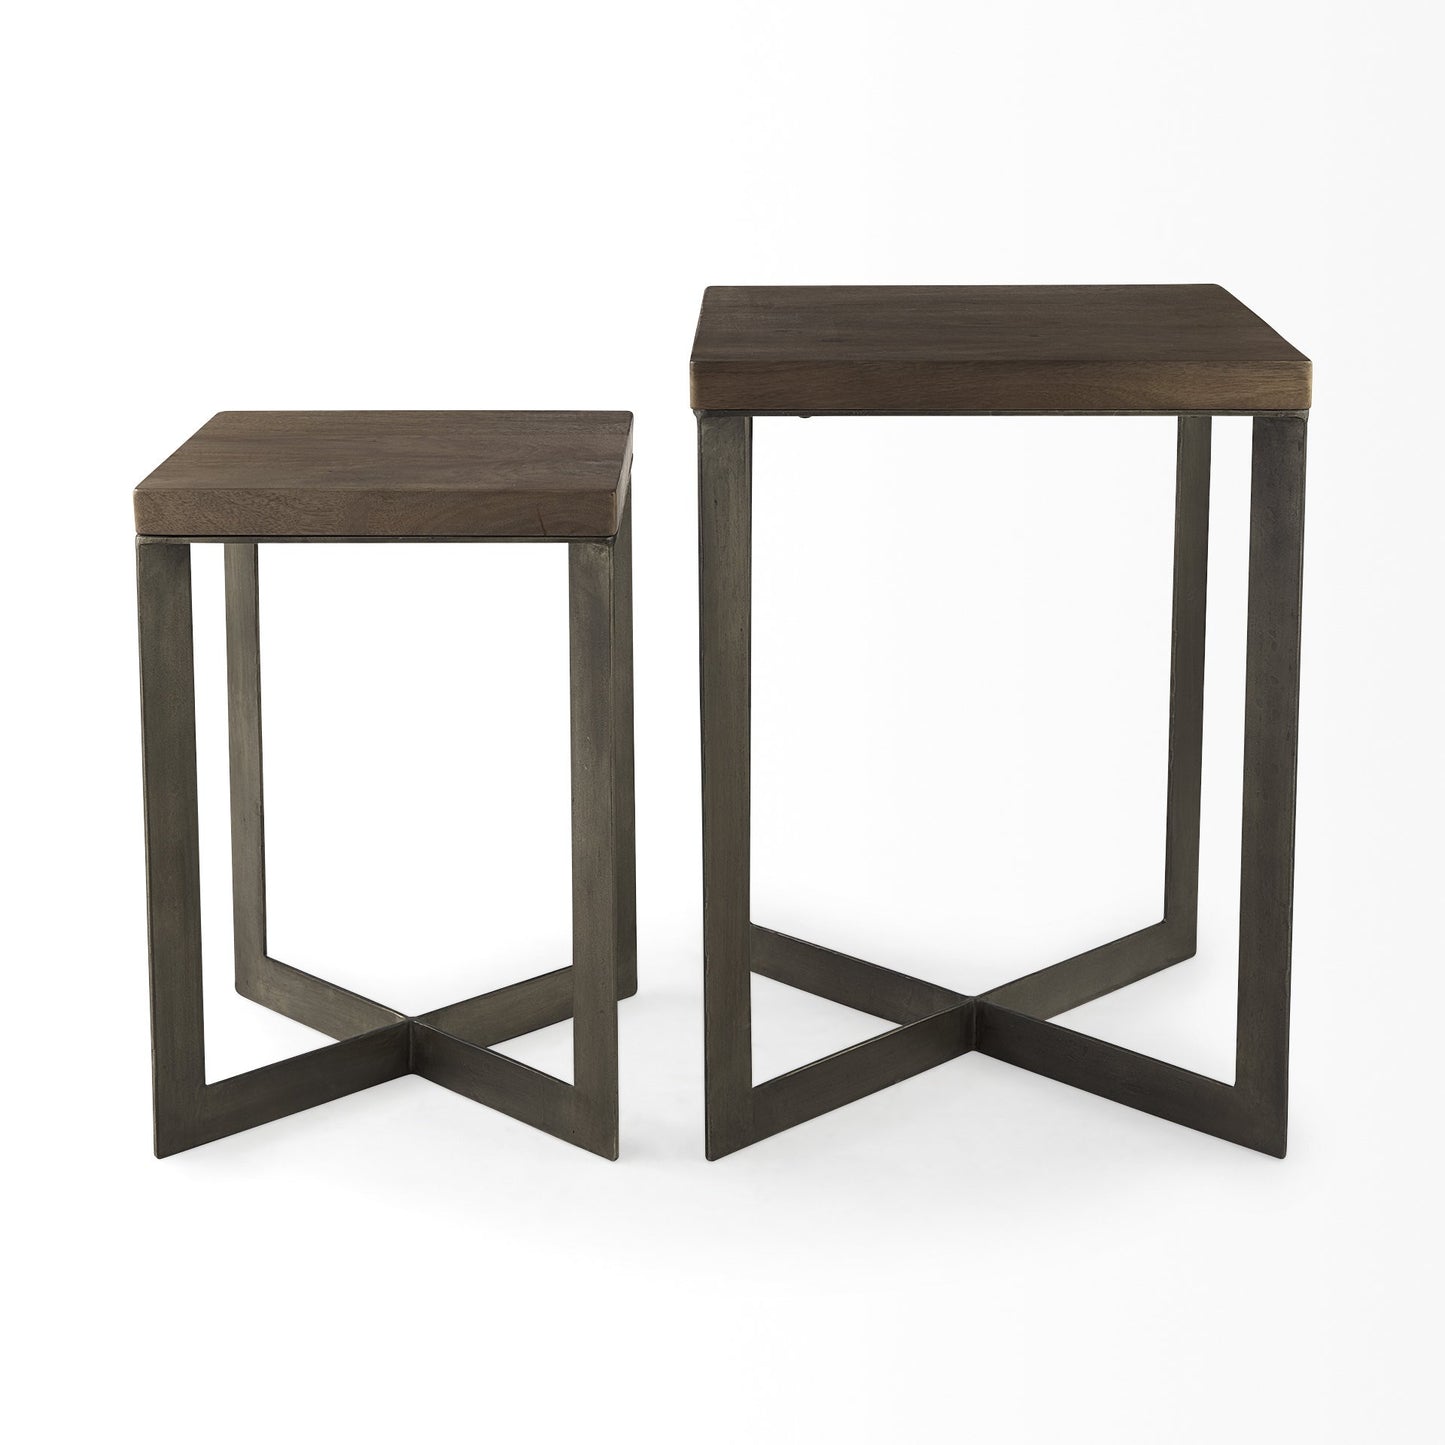 Set of Two Geo Dark Brown Metallic and Wood Tables By Homeroots